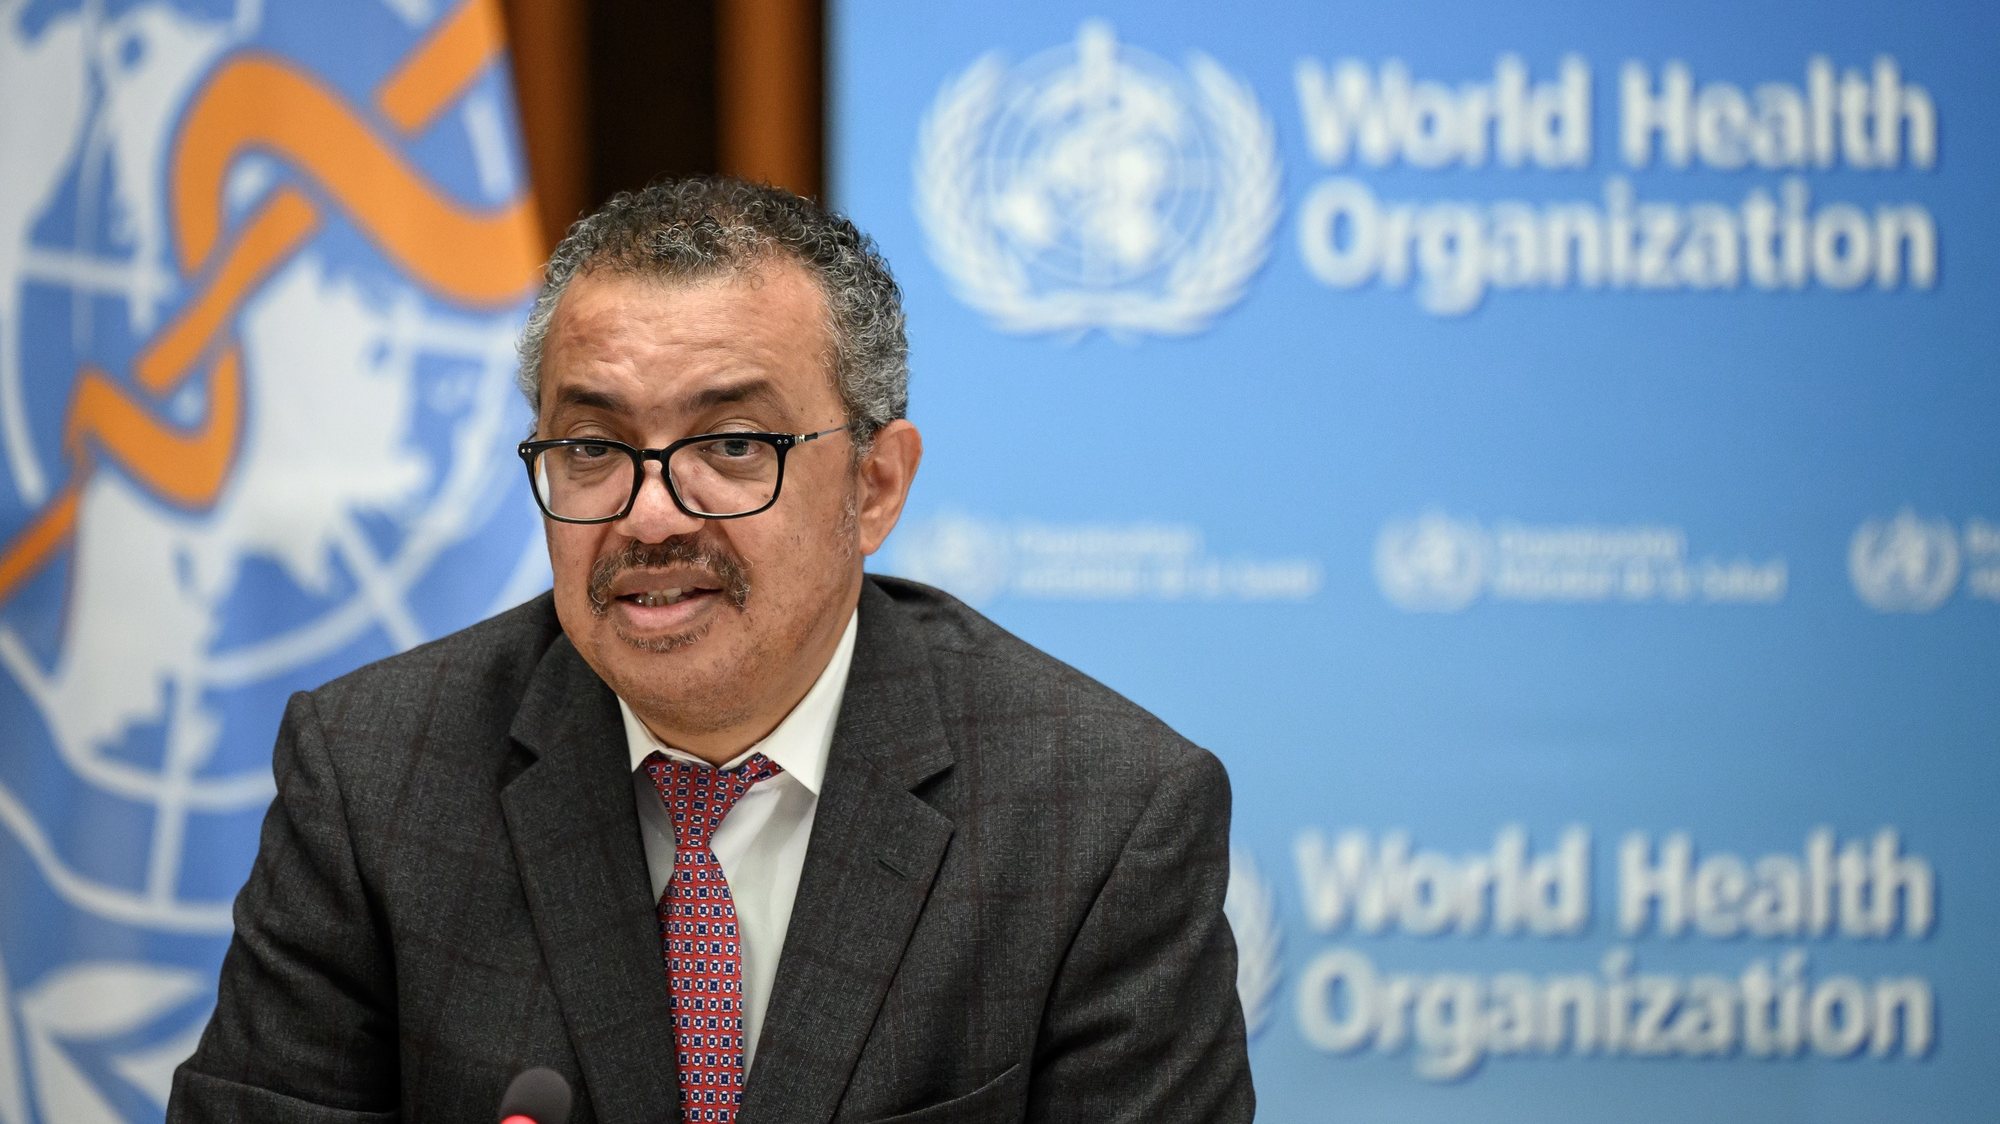 epa09529945 World Health Organization (WHO) Director-General Tedros Adhanom Ghebreyesus delivers a speech during the launch of a multiyear partnership with Qatar on making the FIFA Football World Cup 2022 and mega sporting events healthy and safe, at the WHO headquarters in Geneva, Switzerland,  18 October 2021.  EPA/FABRICE COFFRINI / POOL